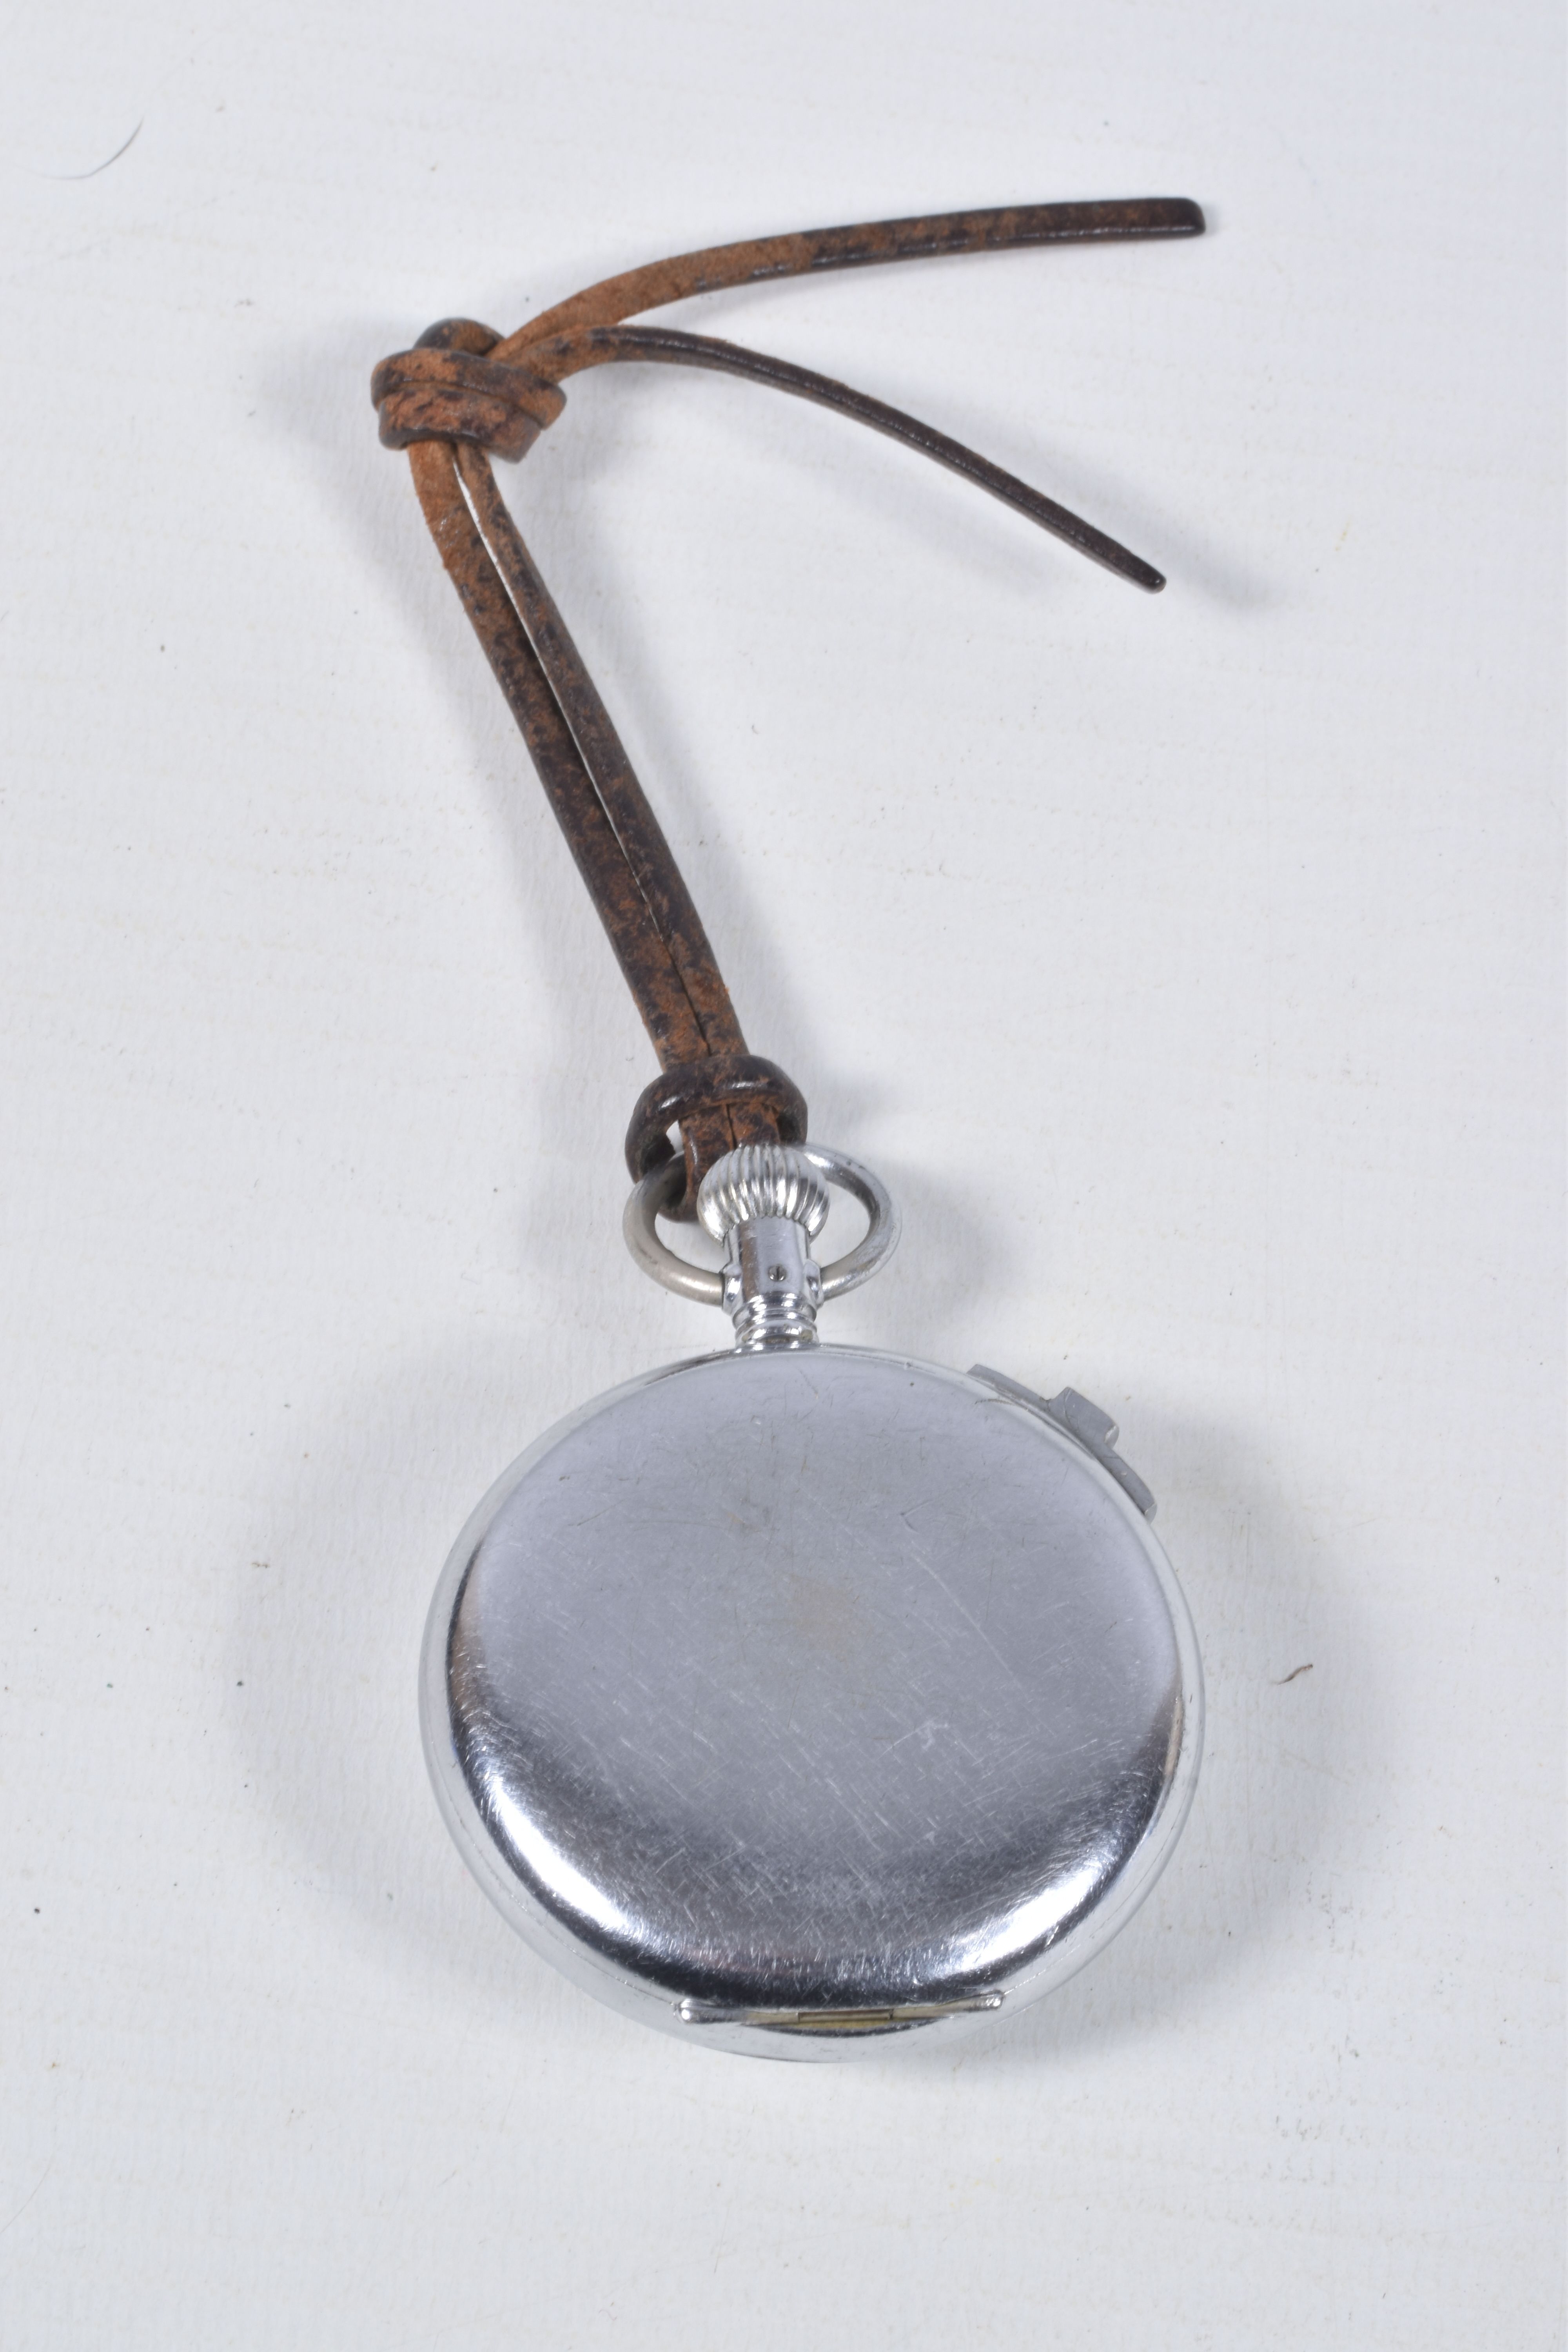 A 'FINDLAY & CO' STOP WATCH AND A PADLOCK, base metal stop watch, together with a base metal padlock - Image 5 of 7